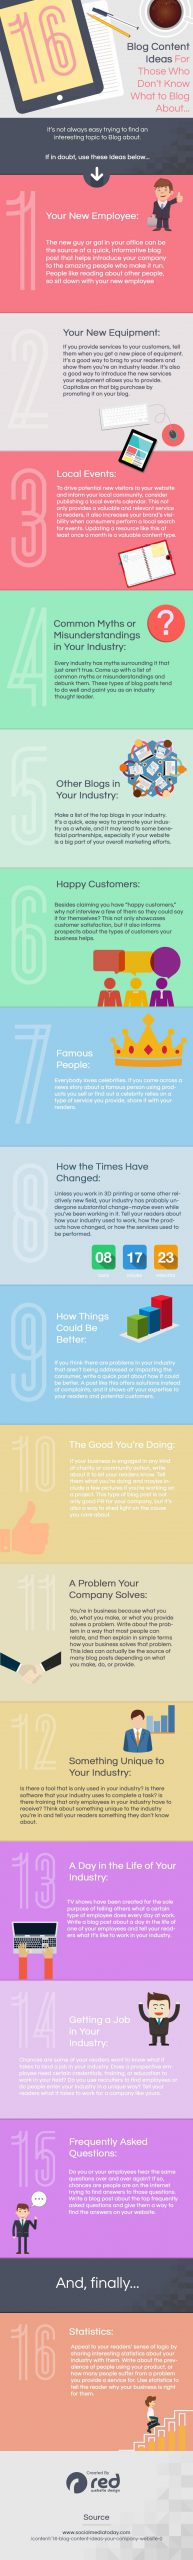 16 website blog content ideas to get more traffic engagement infographic scaled 1